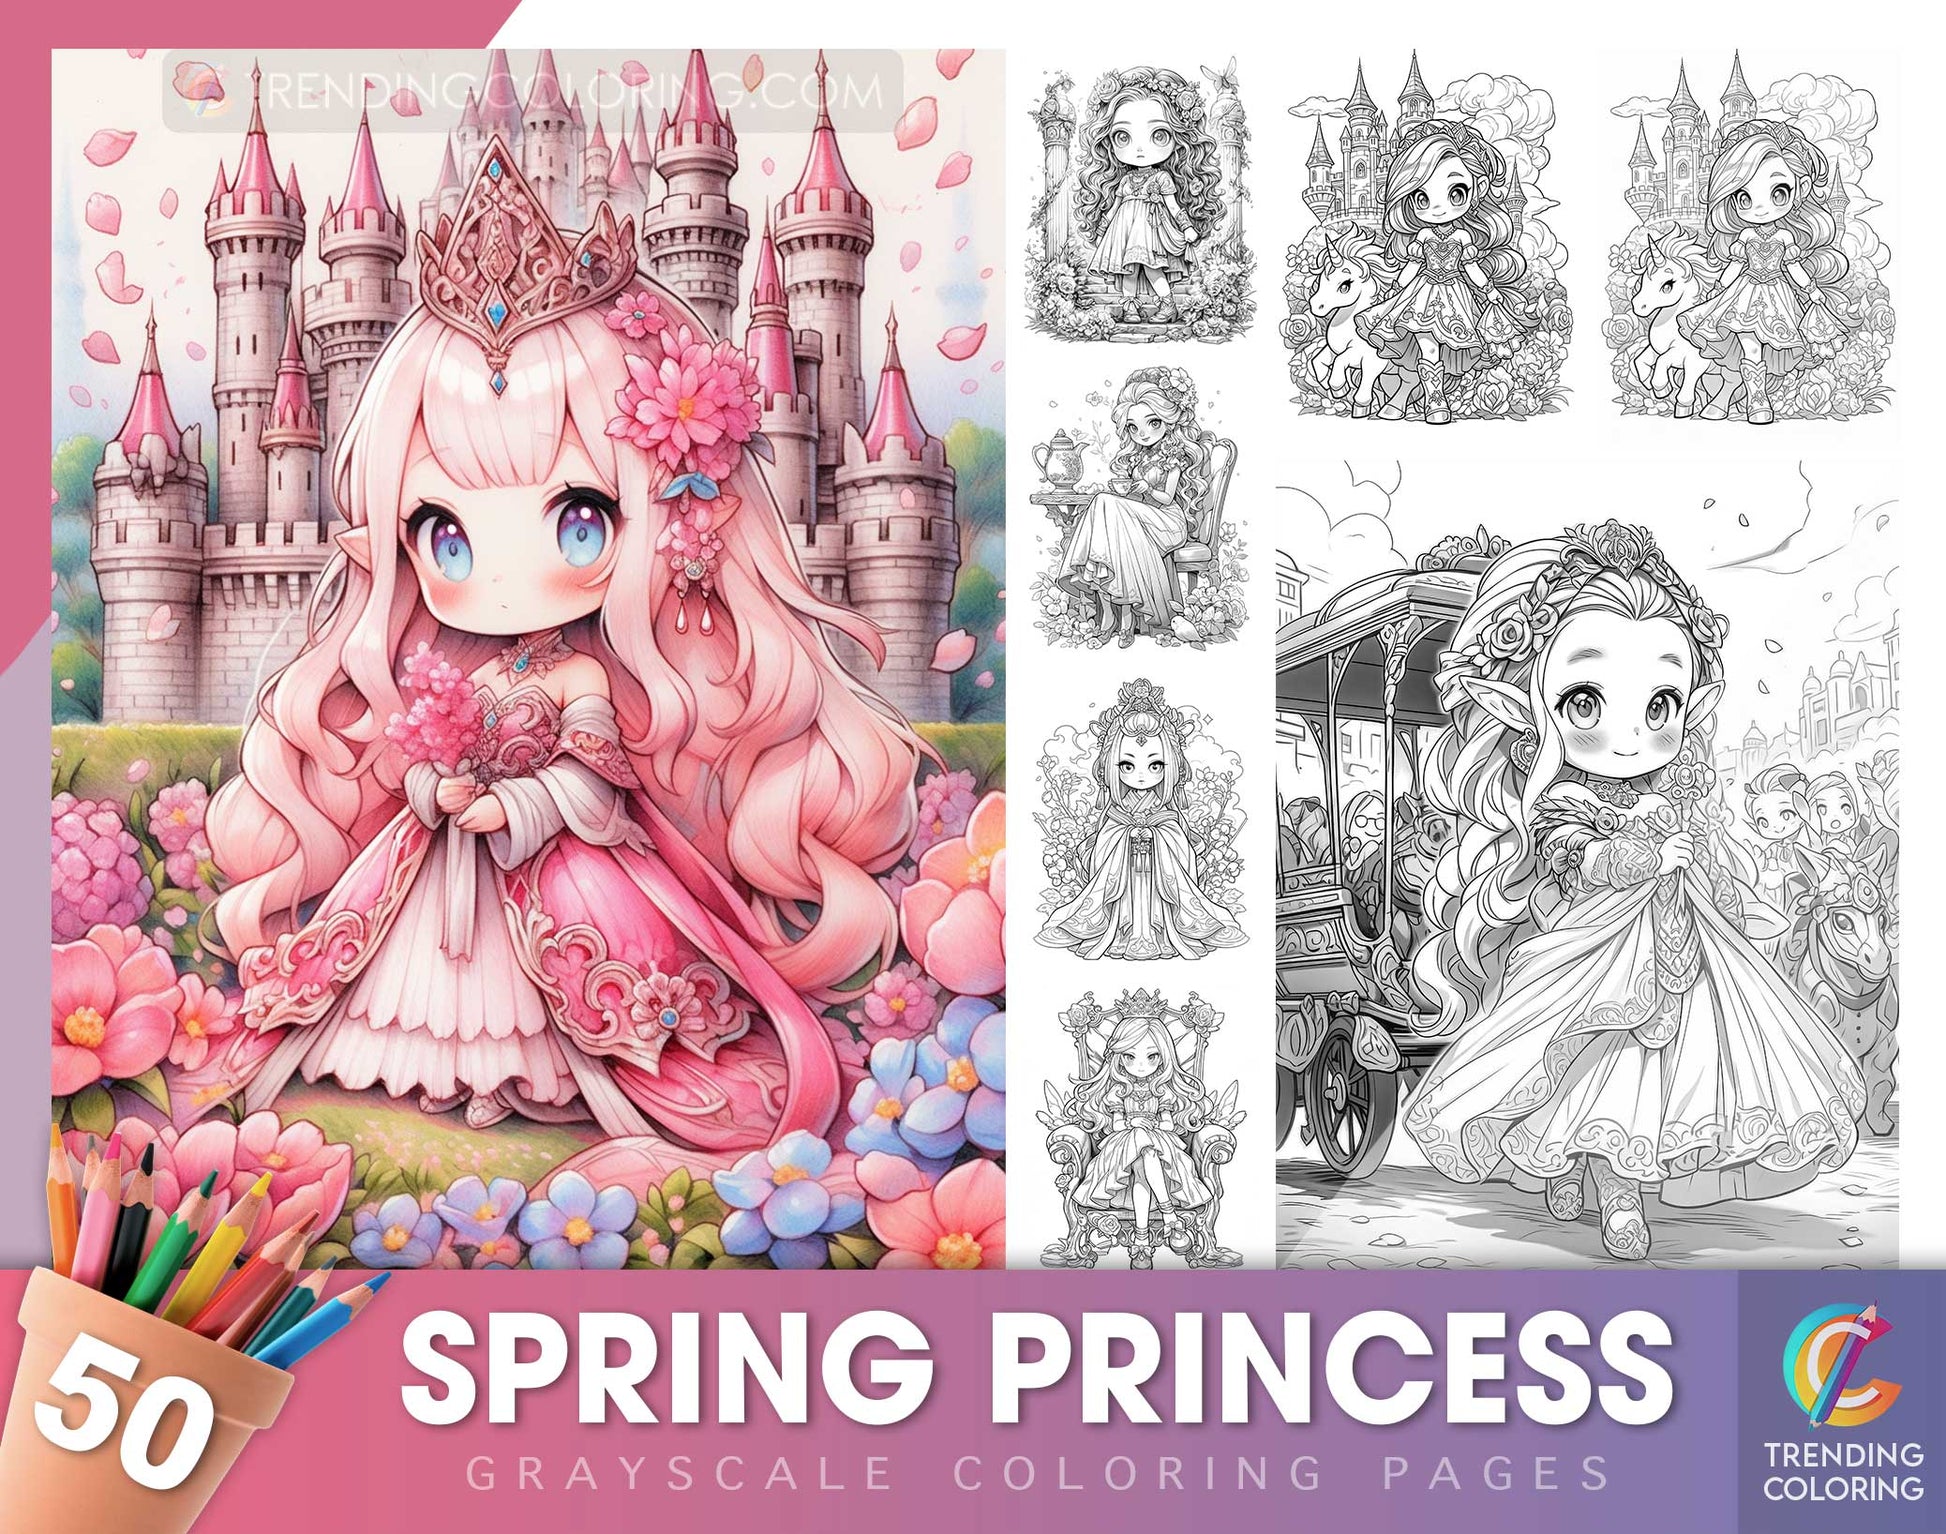 50 Spring Princess Grayscale Coloring Pages - Instant Download - Printable Dark/Light